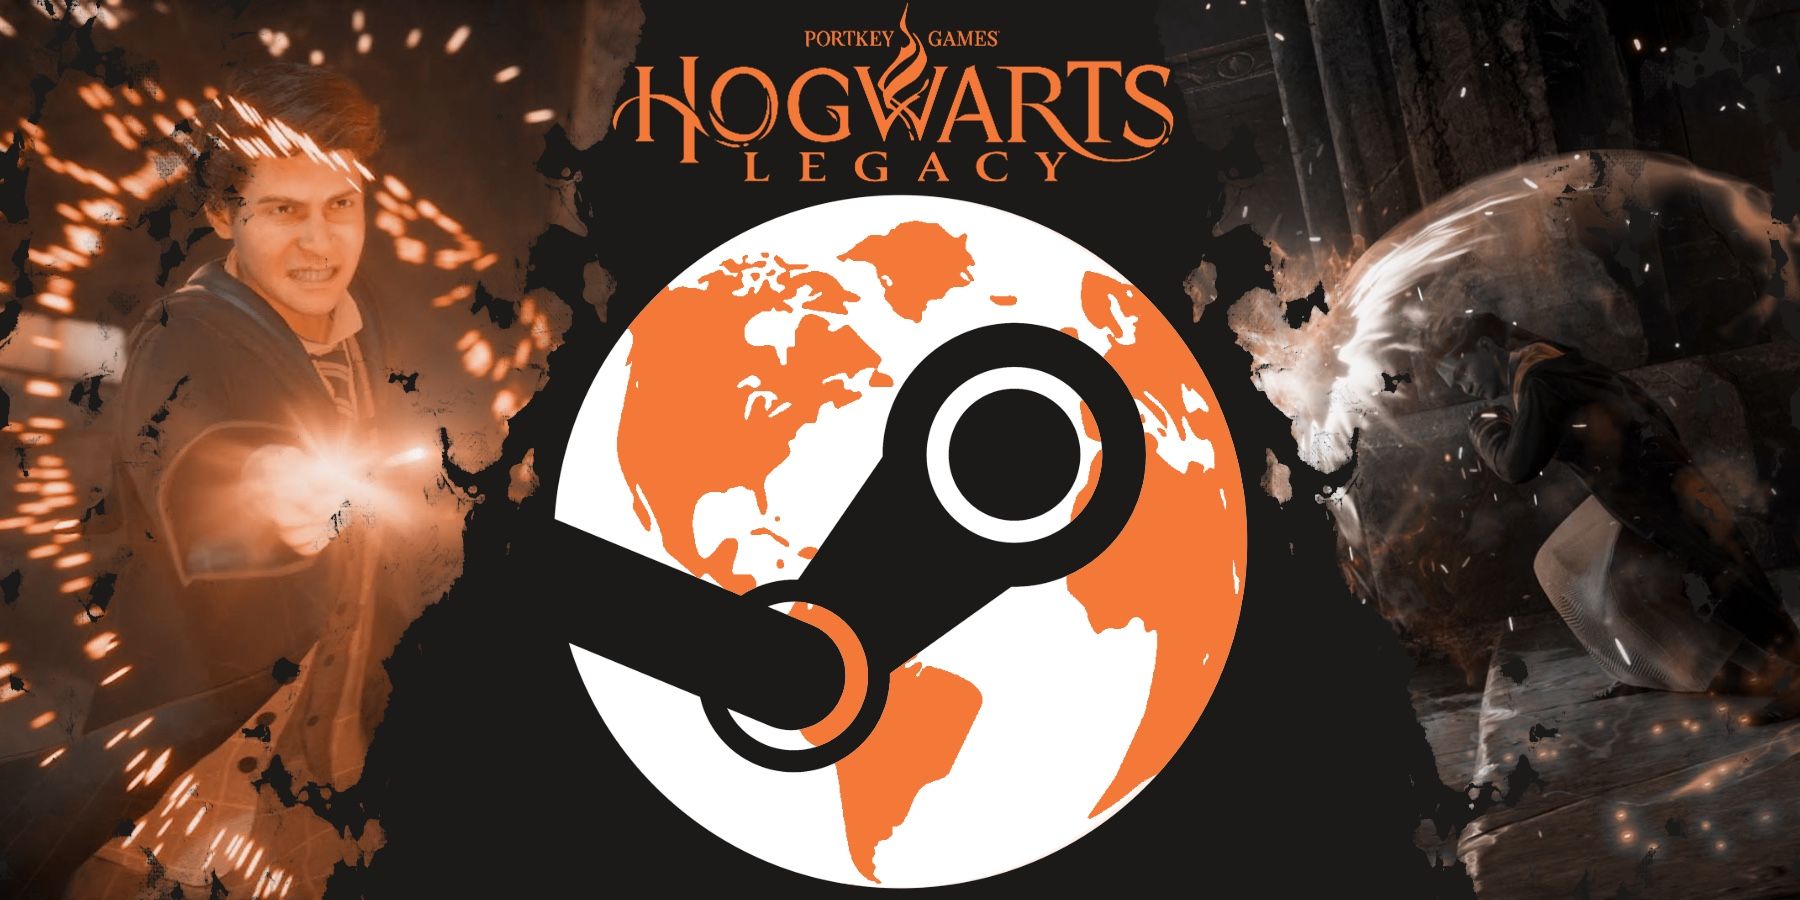 Hogwarts Legacy breaks into top 10 Steam titles by concurrent players,  becomes biggest HP game launch of all time